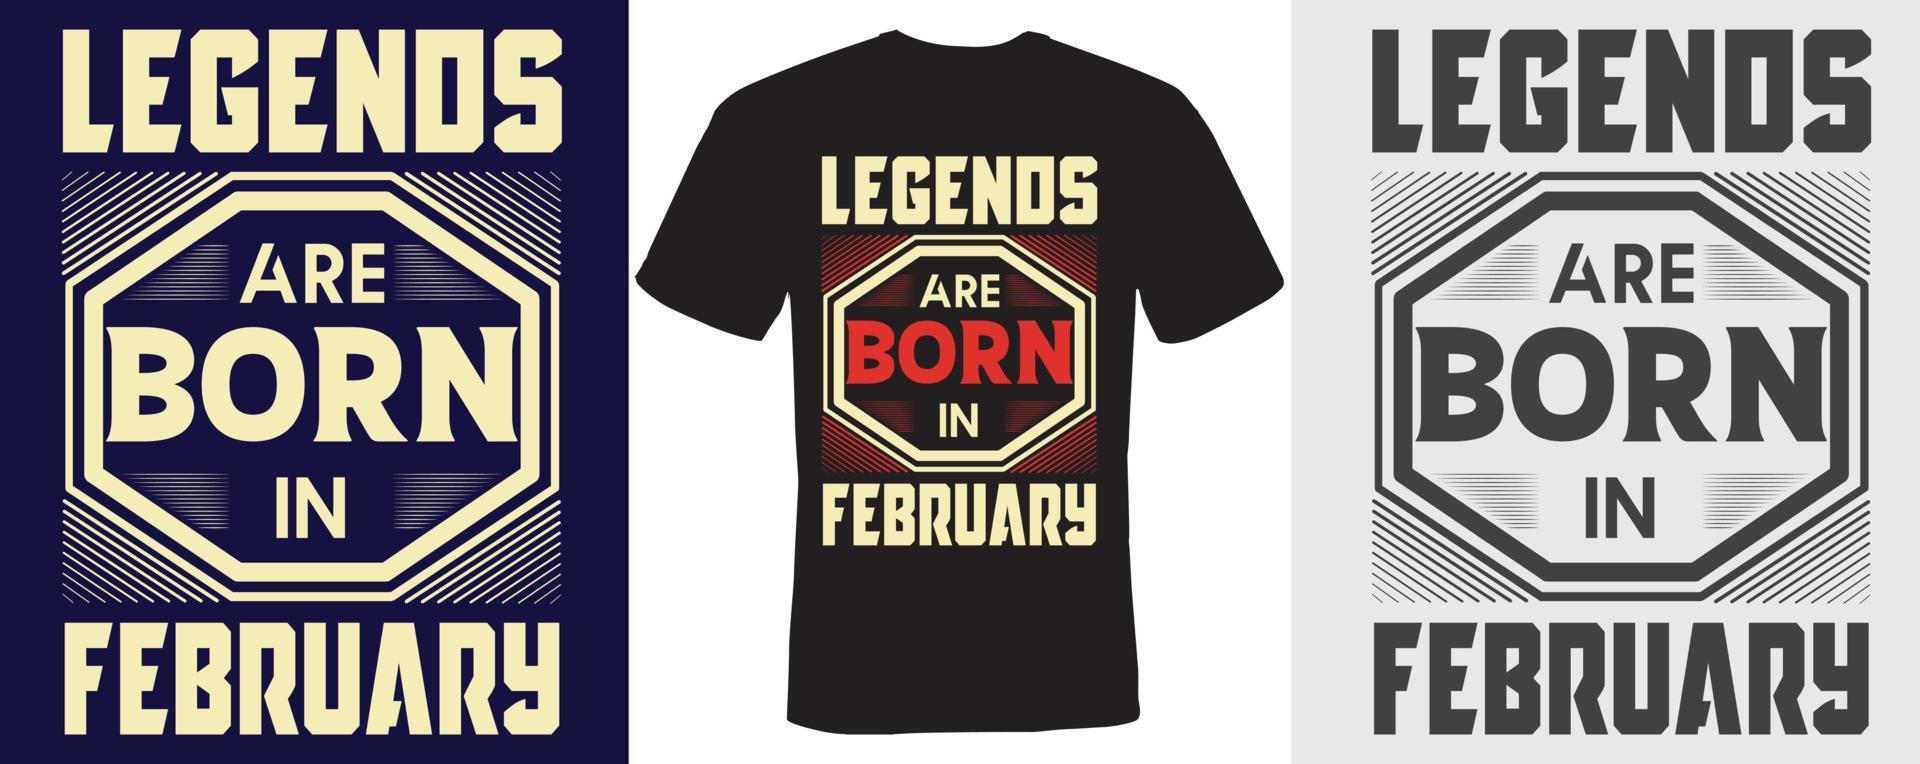 Legends are born in February  t-shirt design for February vector